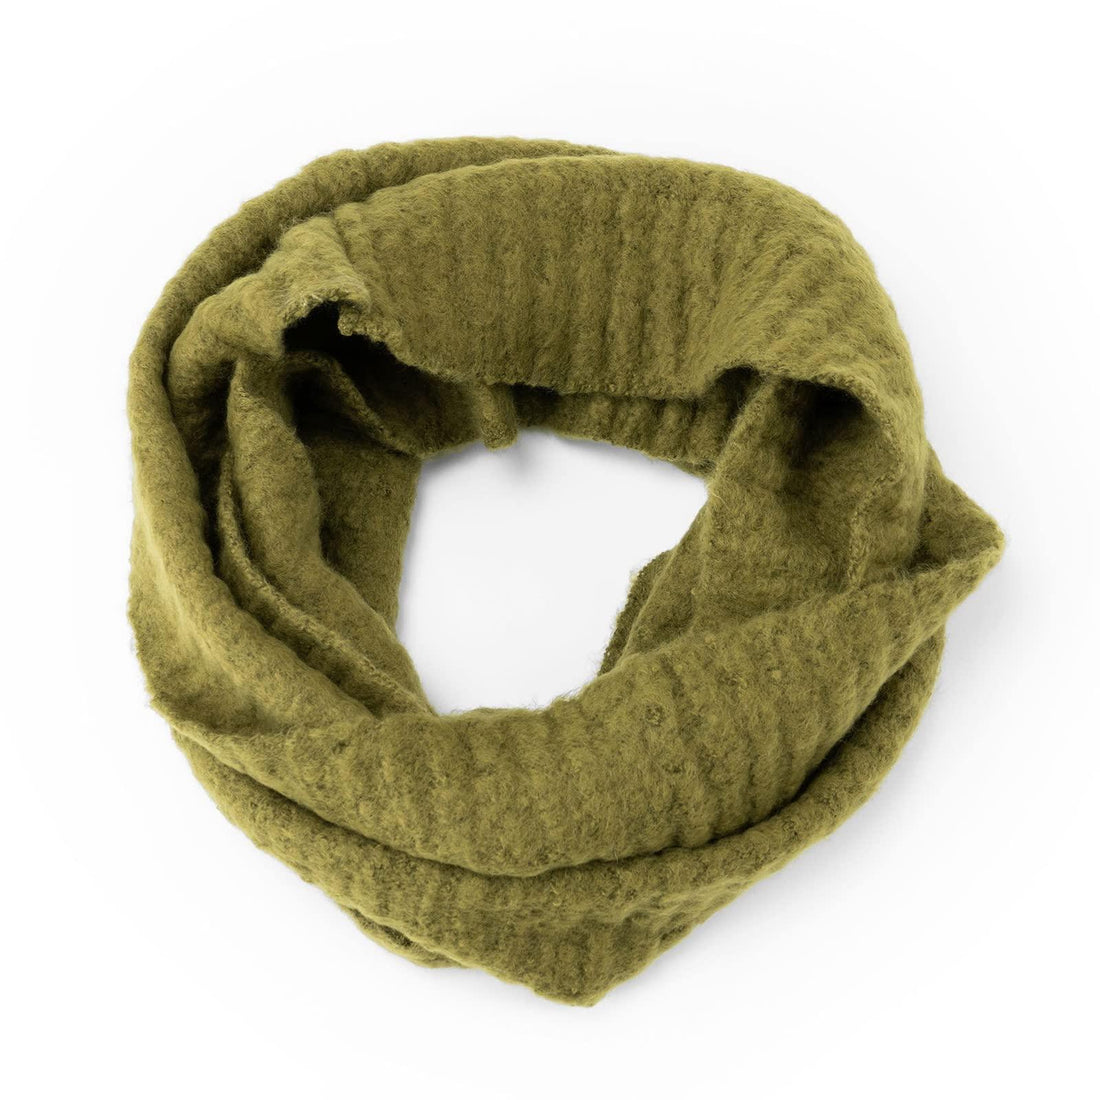 Ecofriendly Recycled Bottle Infinity Scarf - Olive Green - Kitty Hawk Kites Online Store